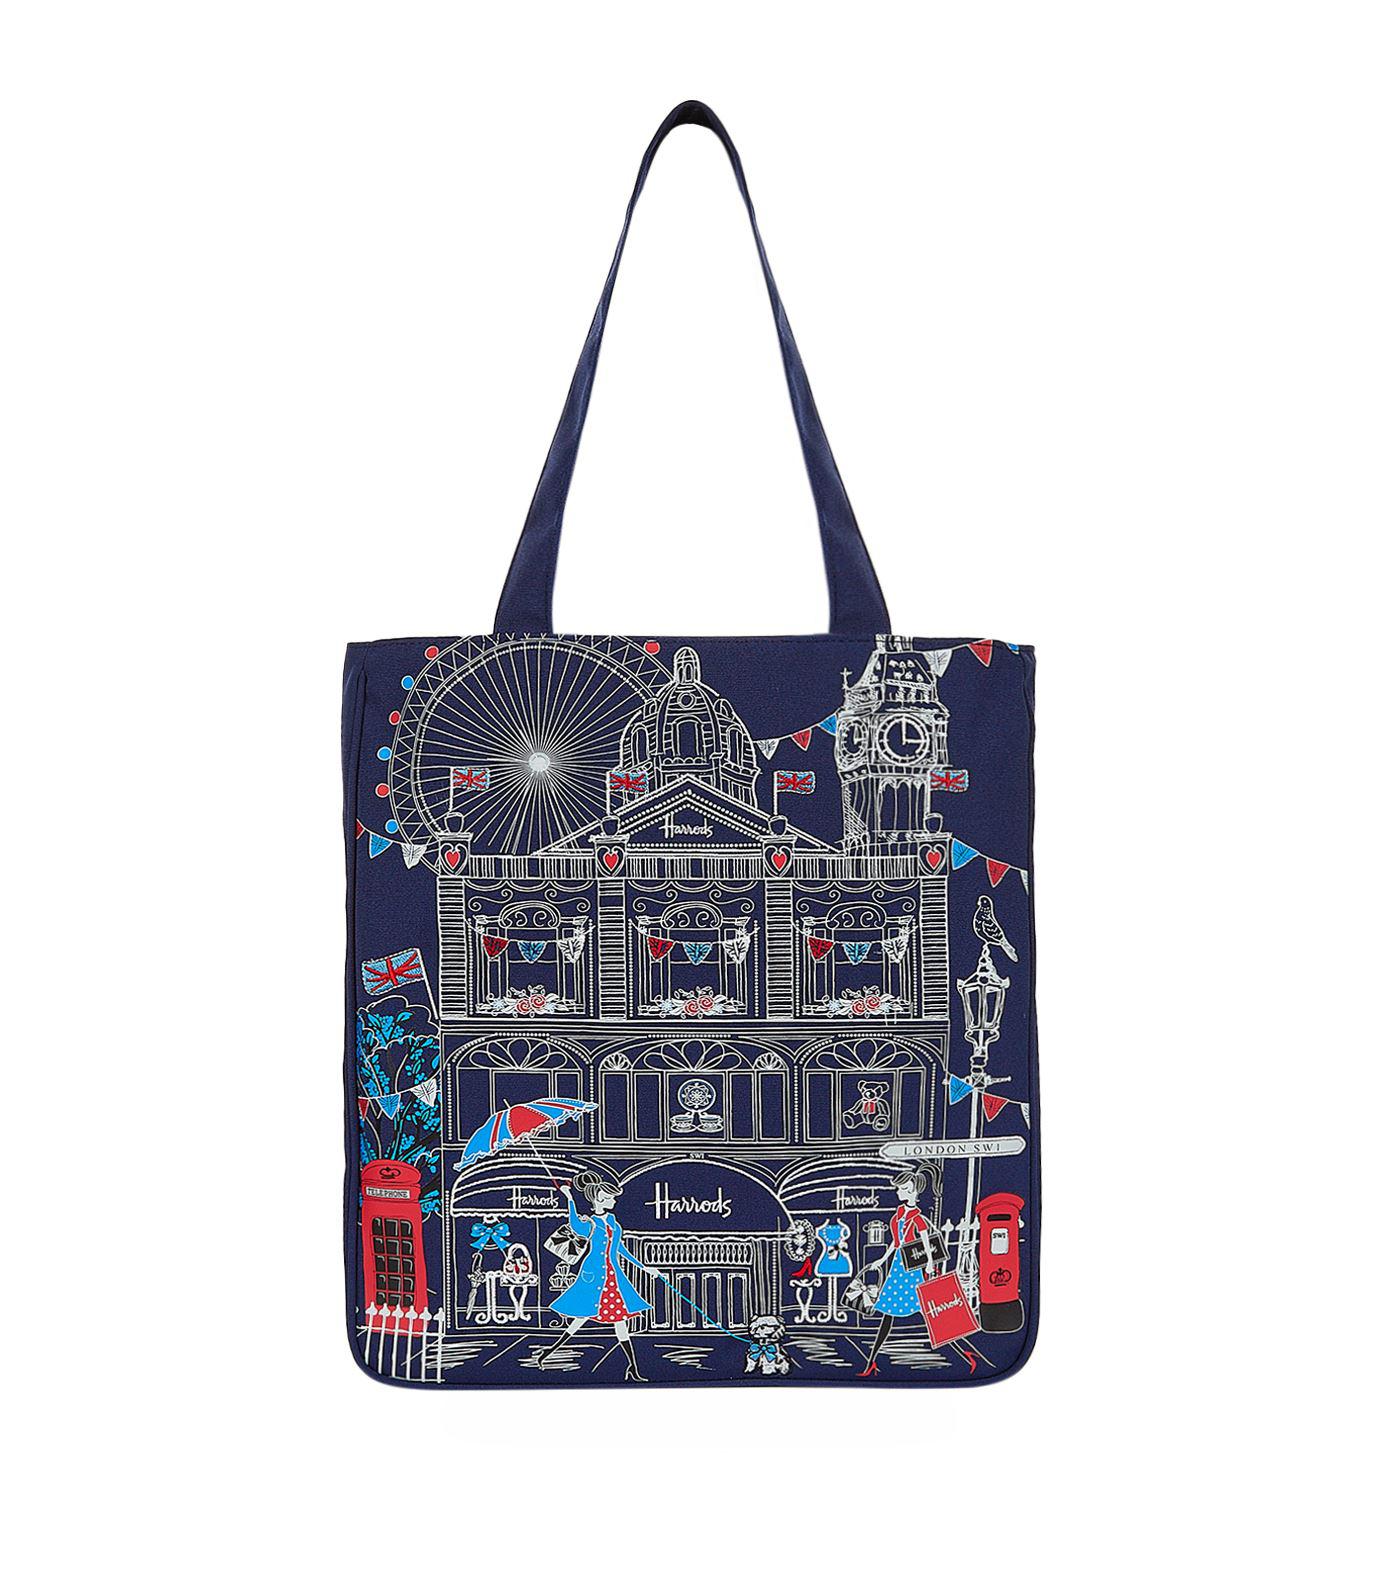 Harrods Embroidered London Sw1 Tote Bag in Blue | Lyst